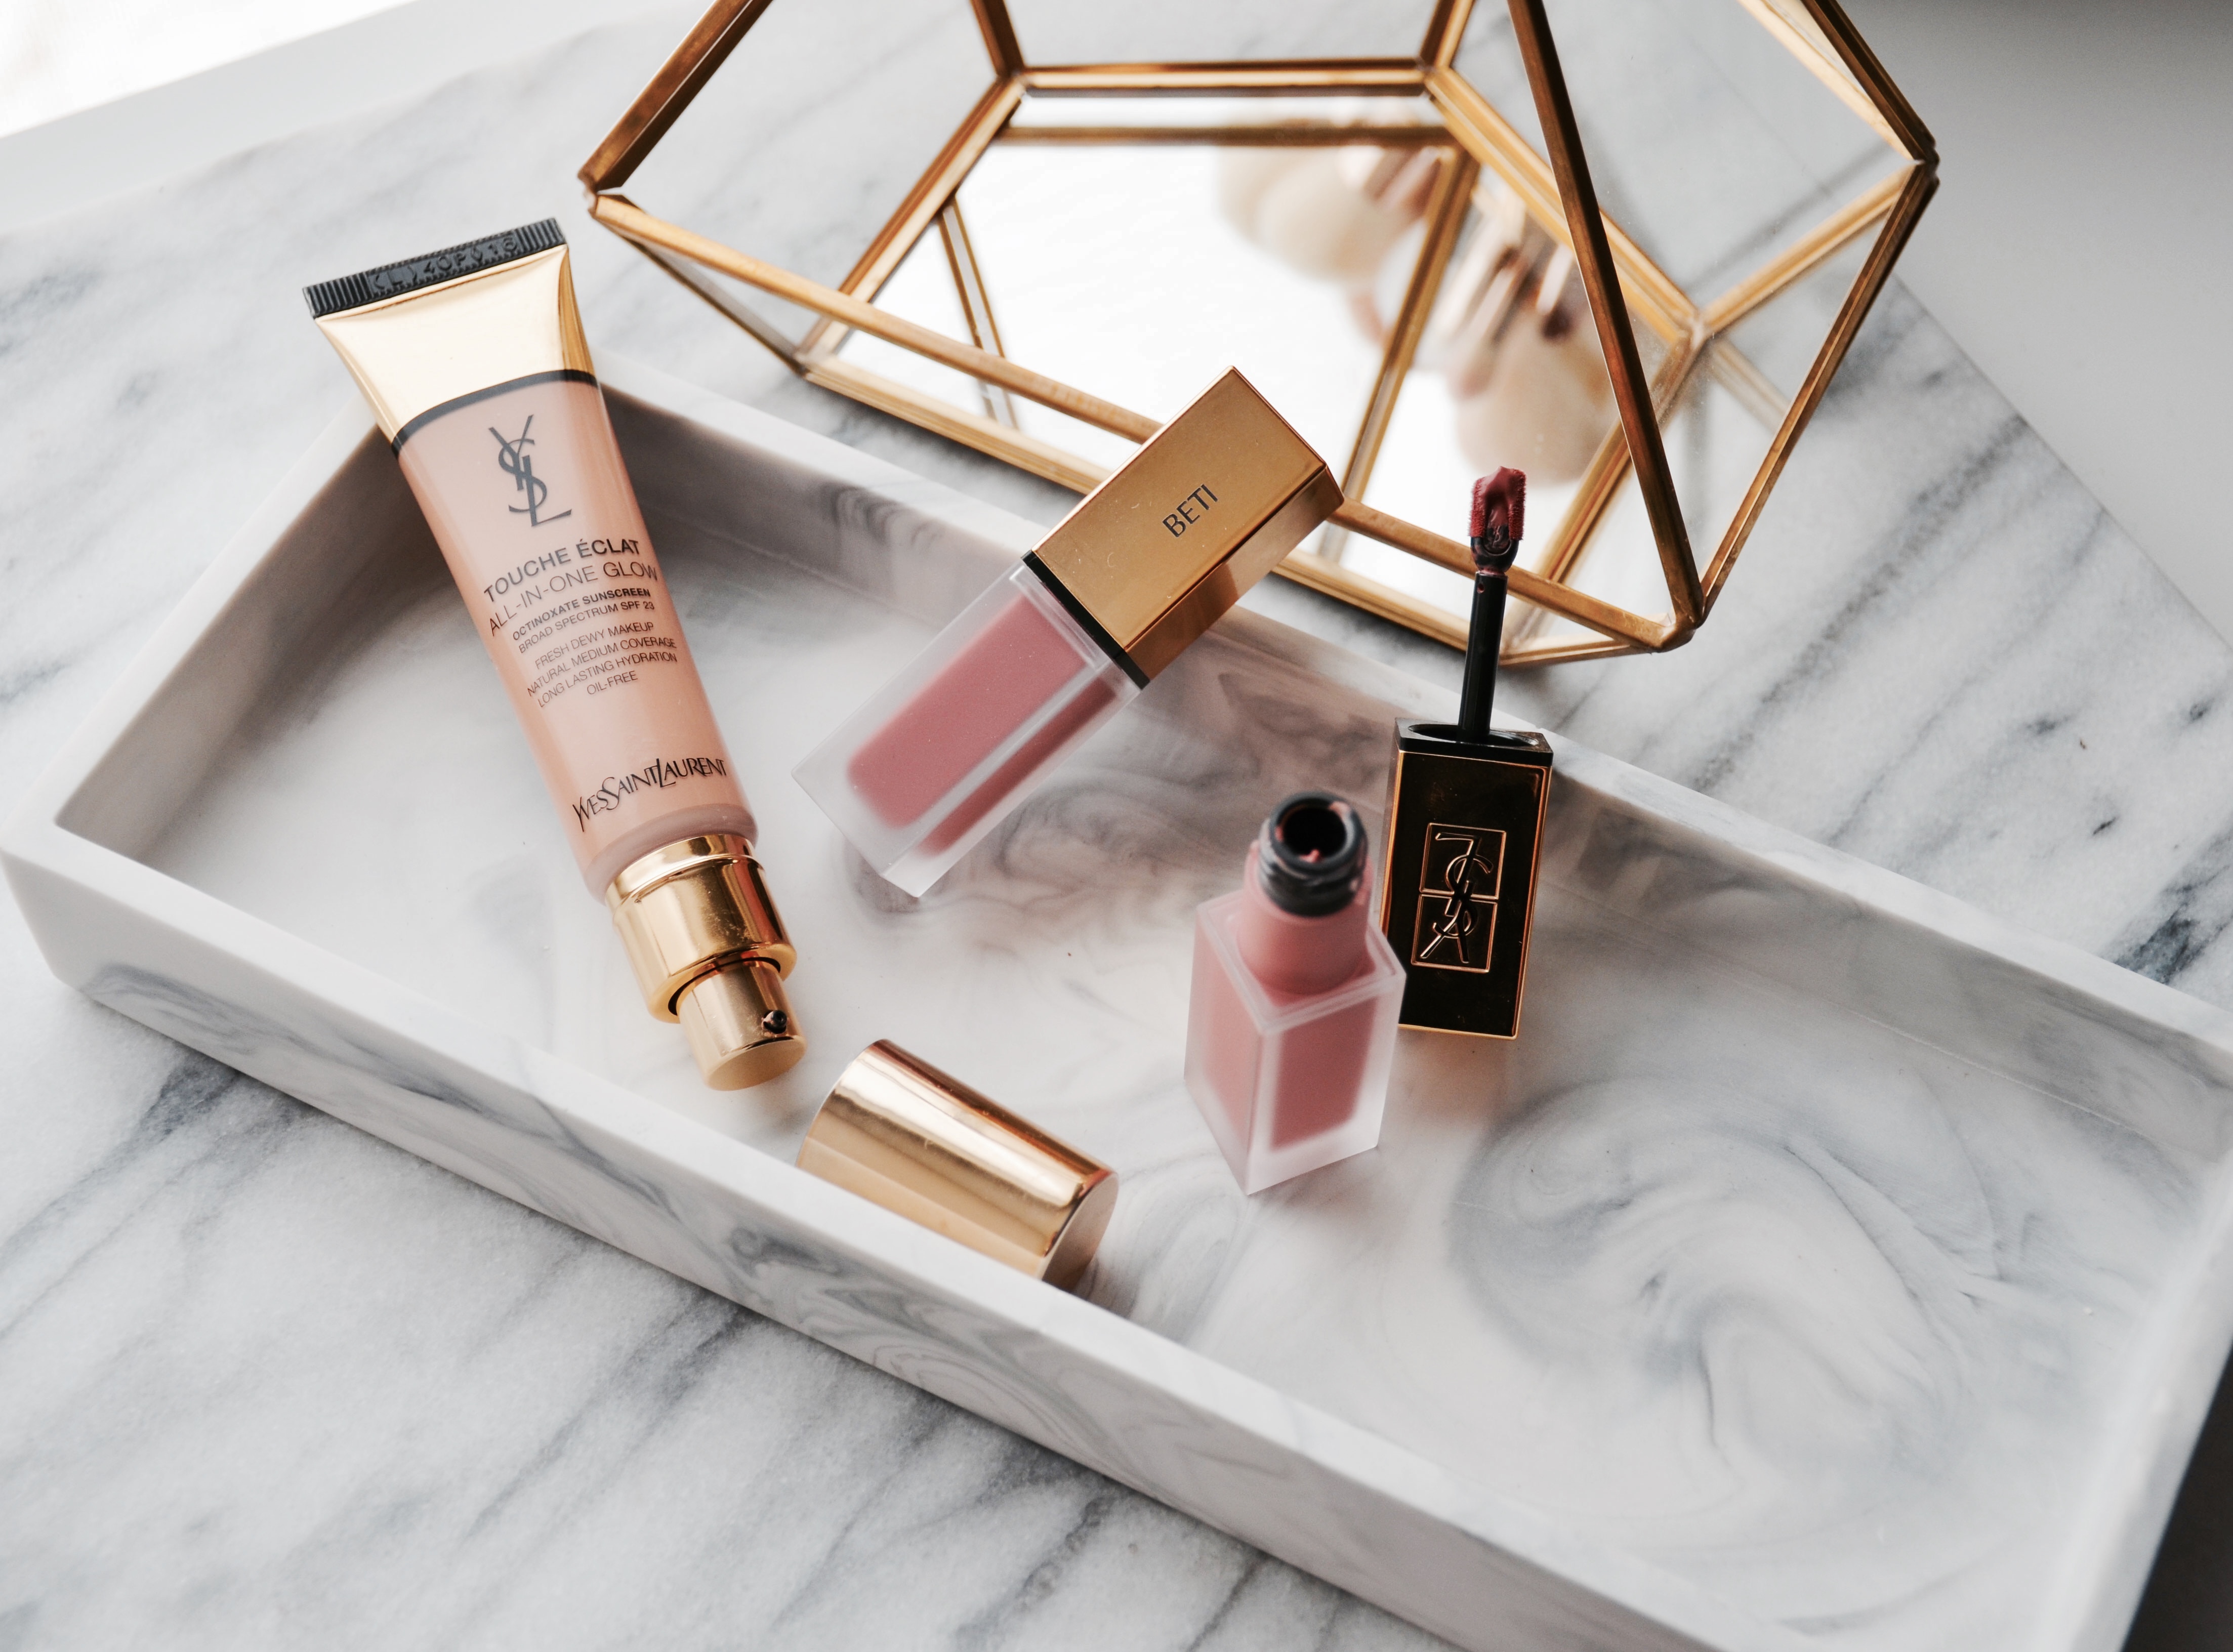 ysl touche eclat all in one glow foundation swatches